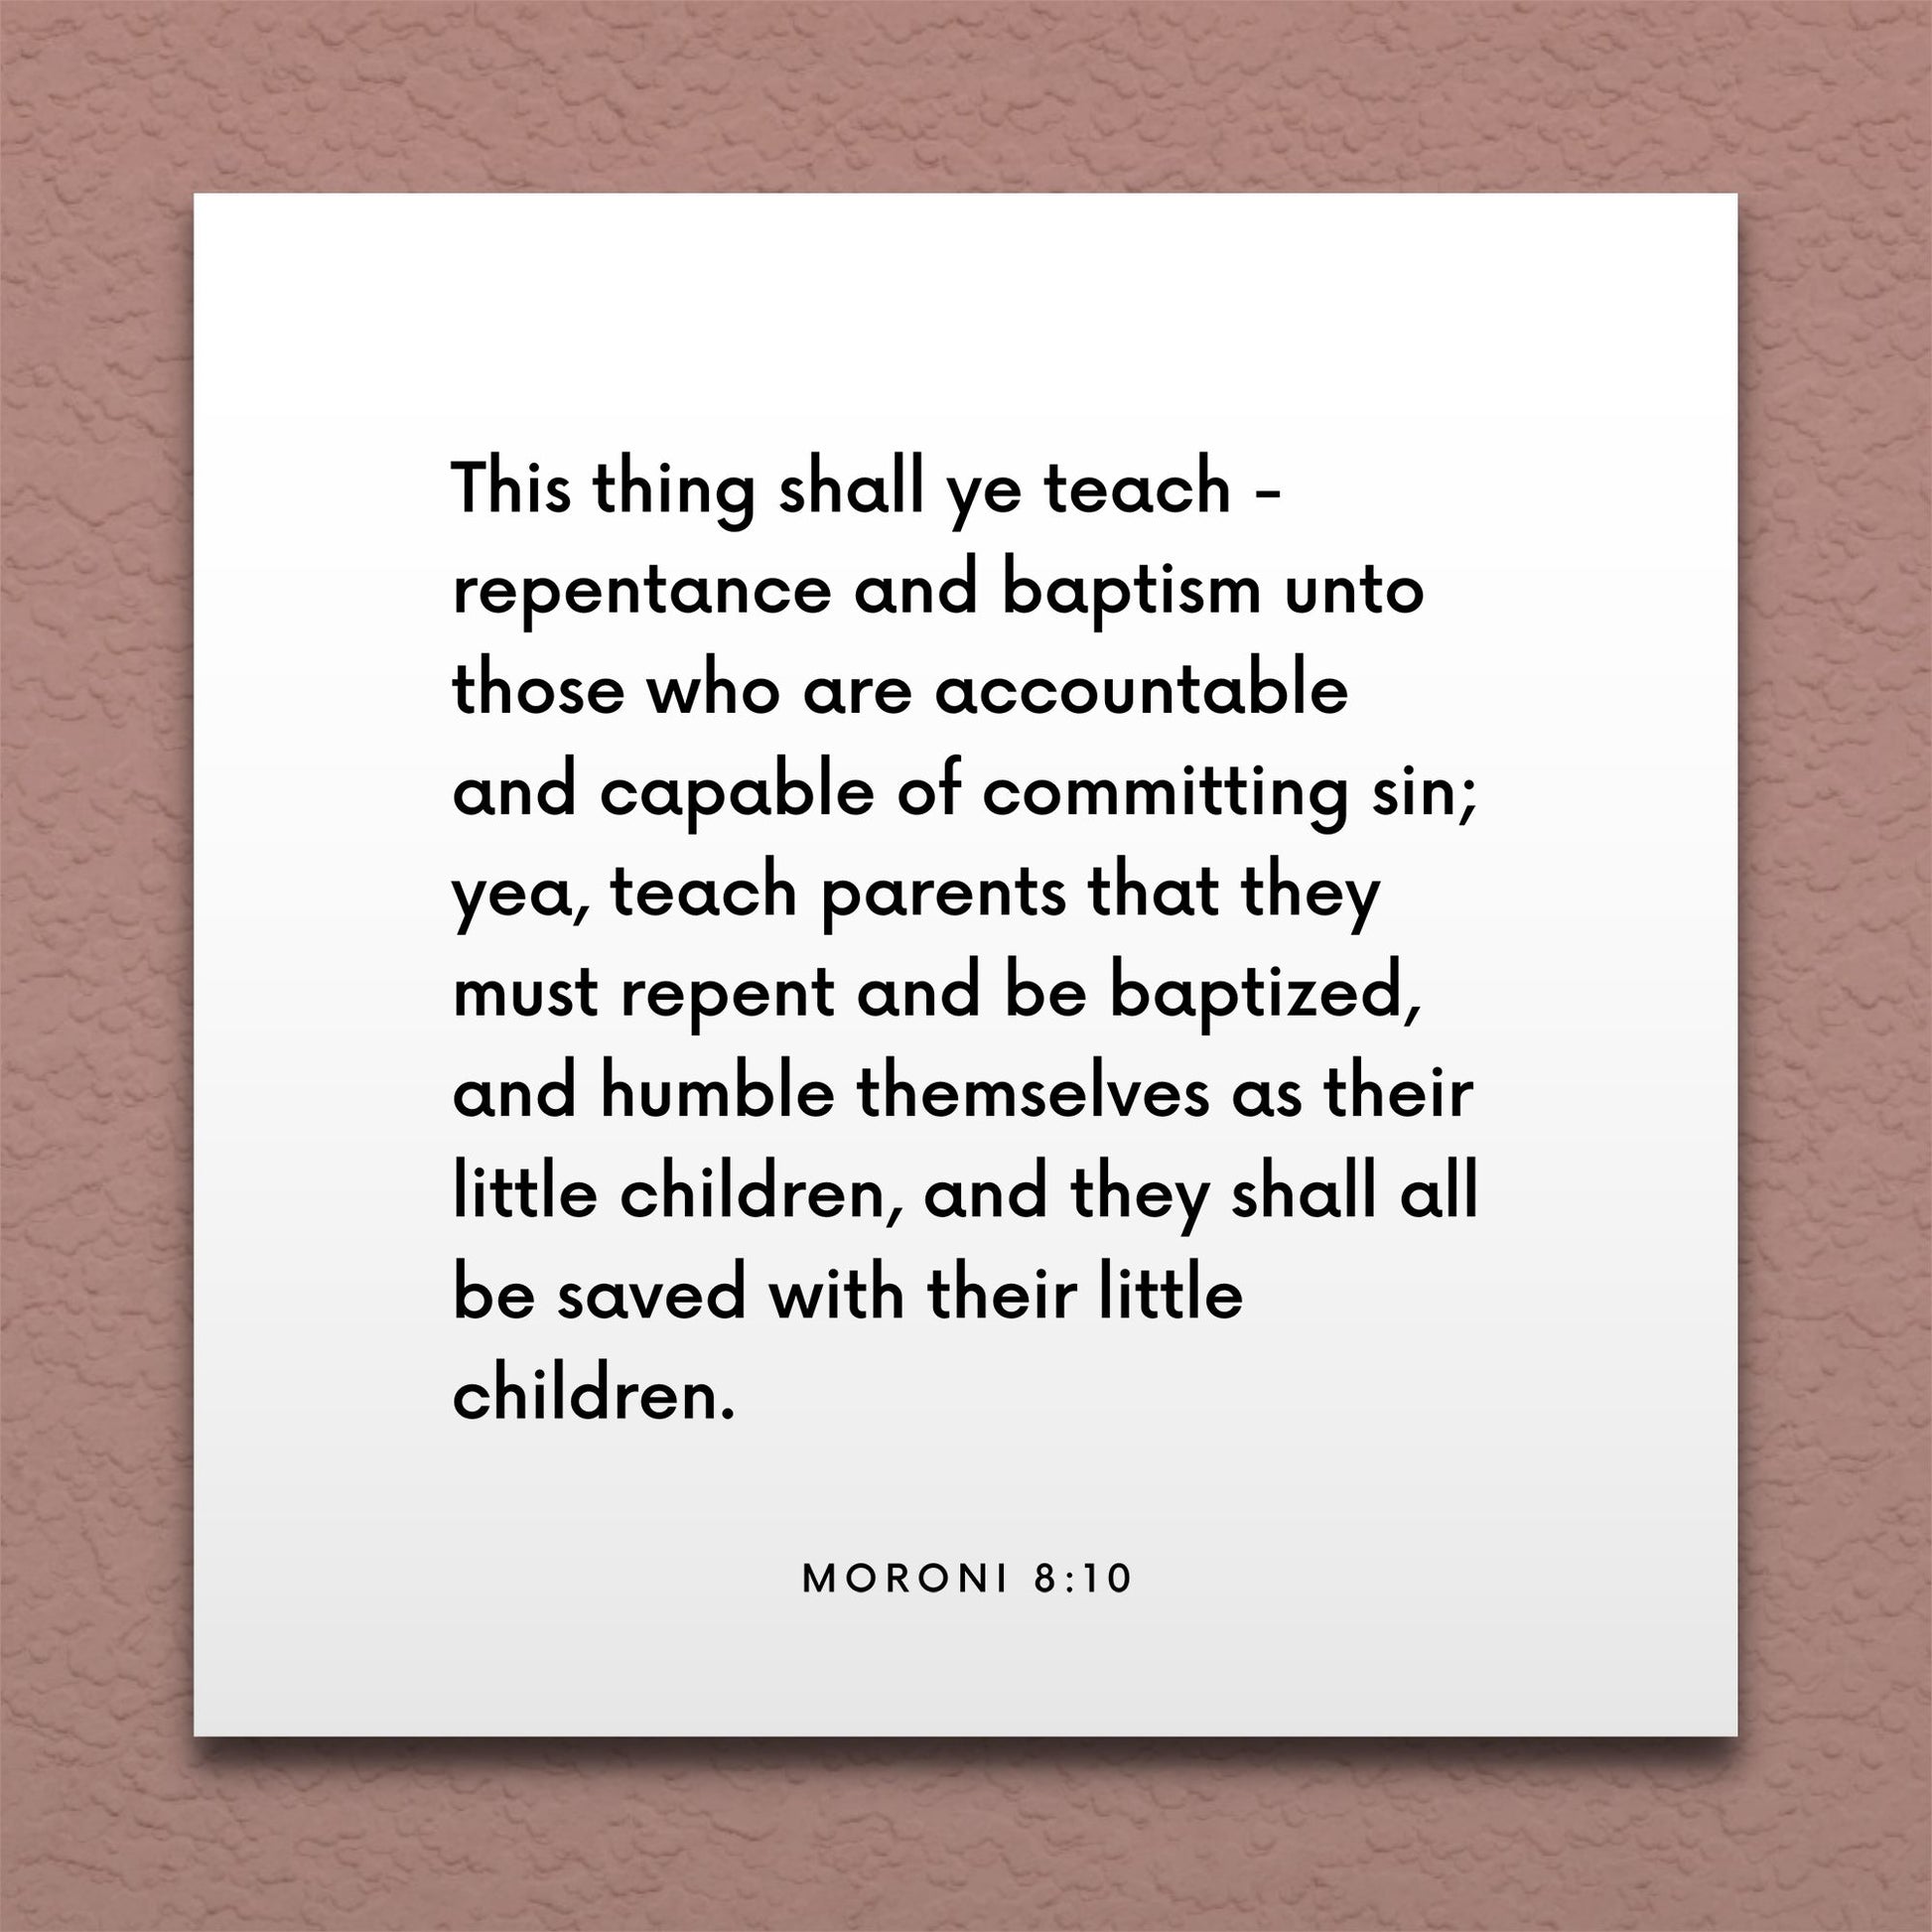 Wall-mounted scripture tile for Moroni 8:10 - "Parents must humble themselves as their little children"